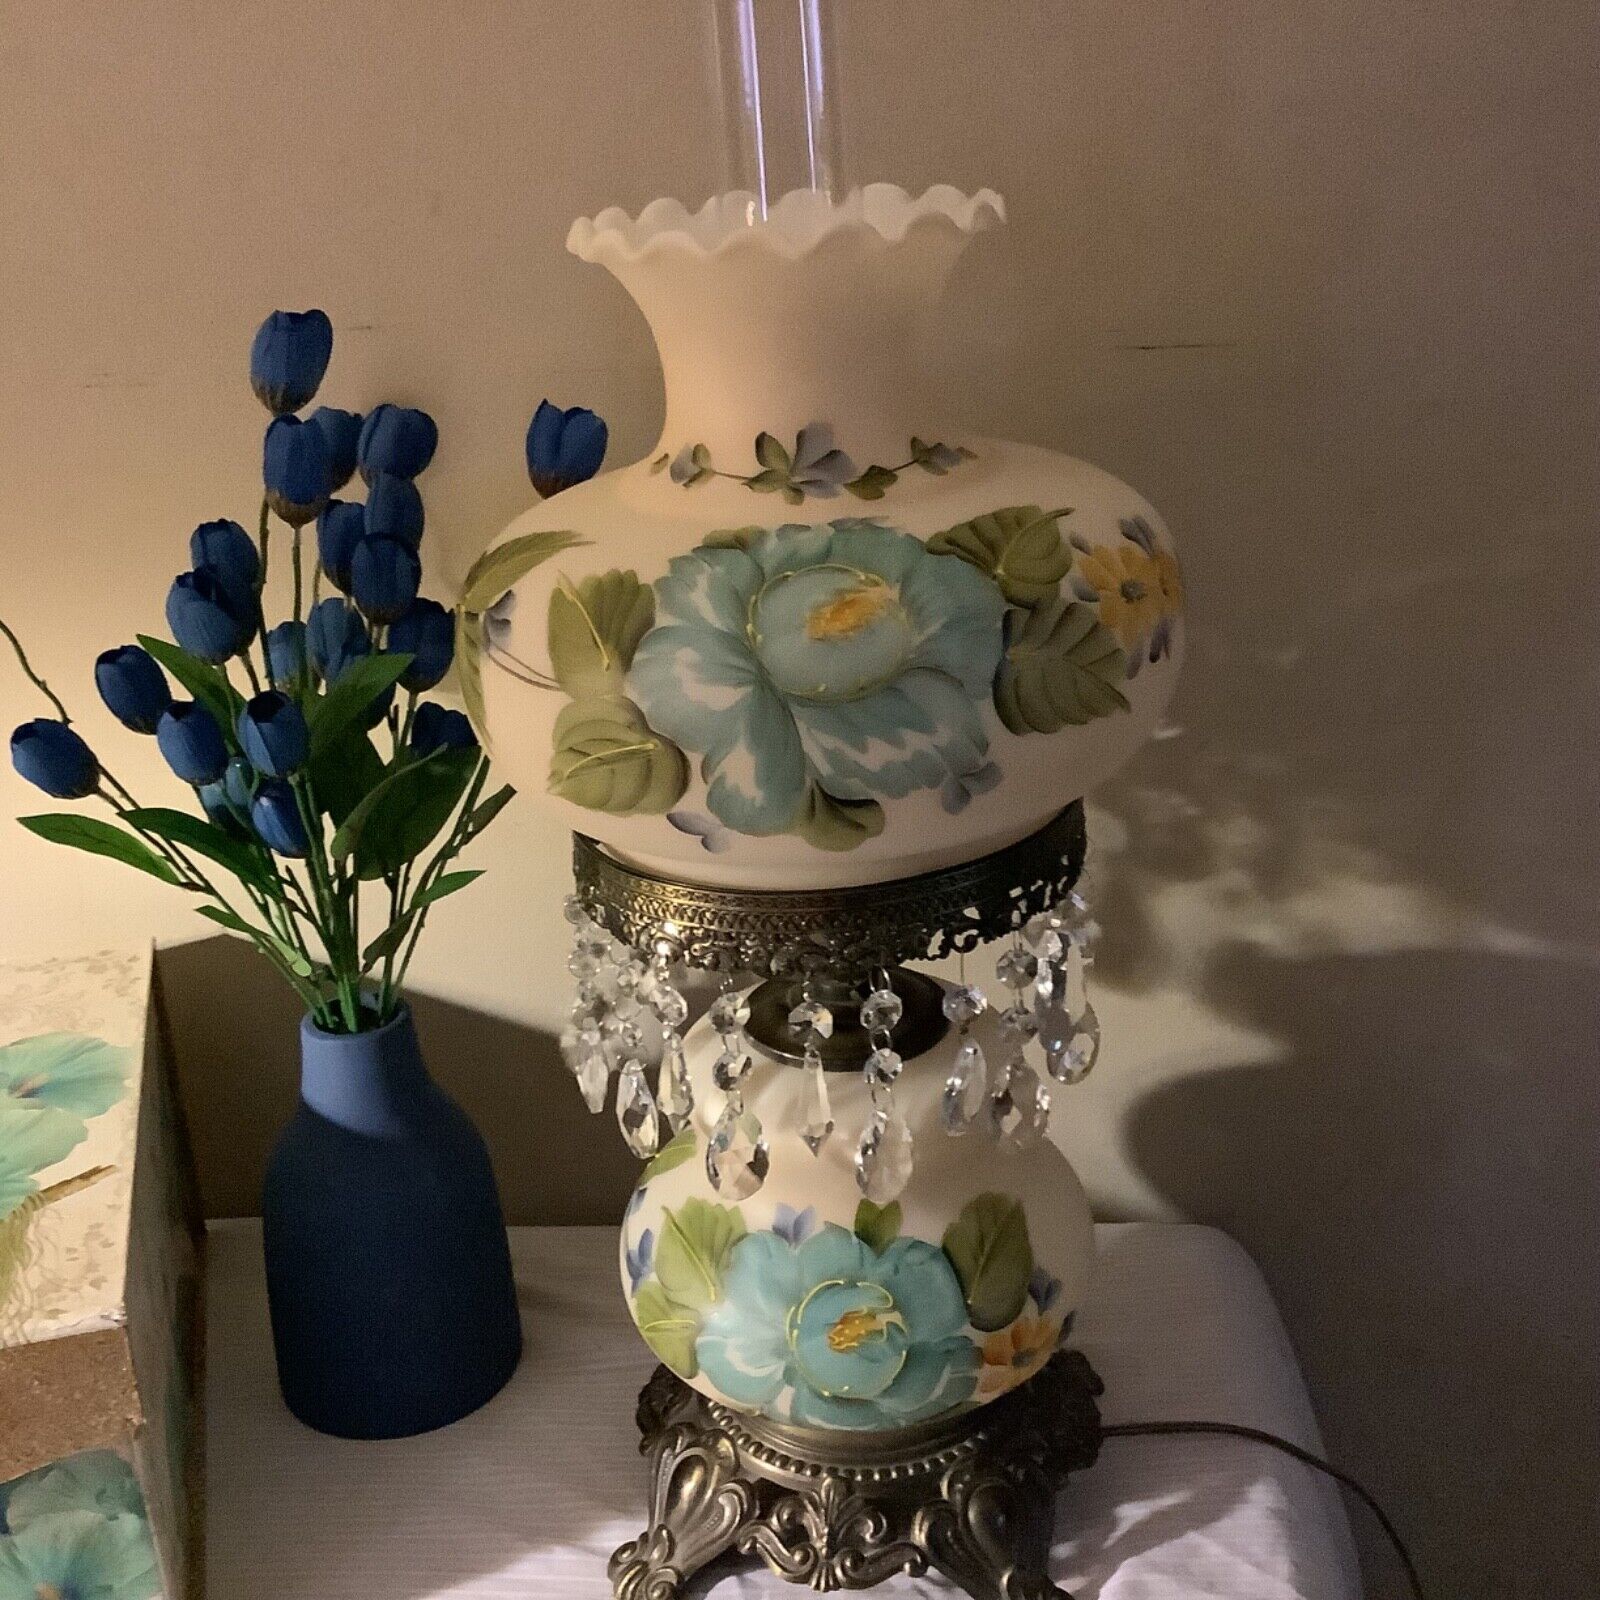 GONE THE WIND Parlor Hurricane Lamp 3-Way Hand Painted Blue Floral Antique